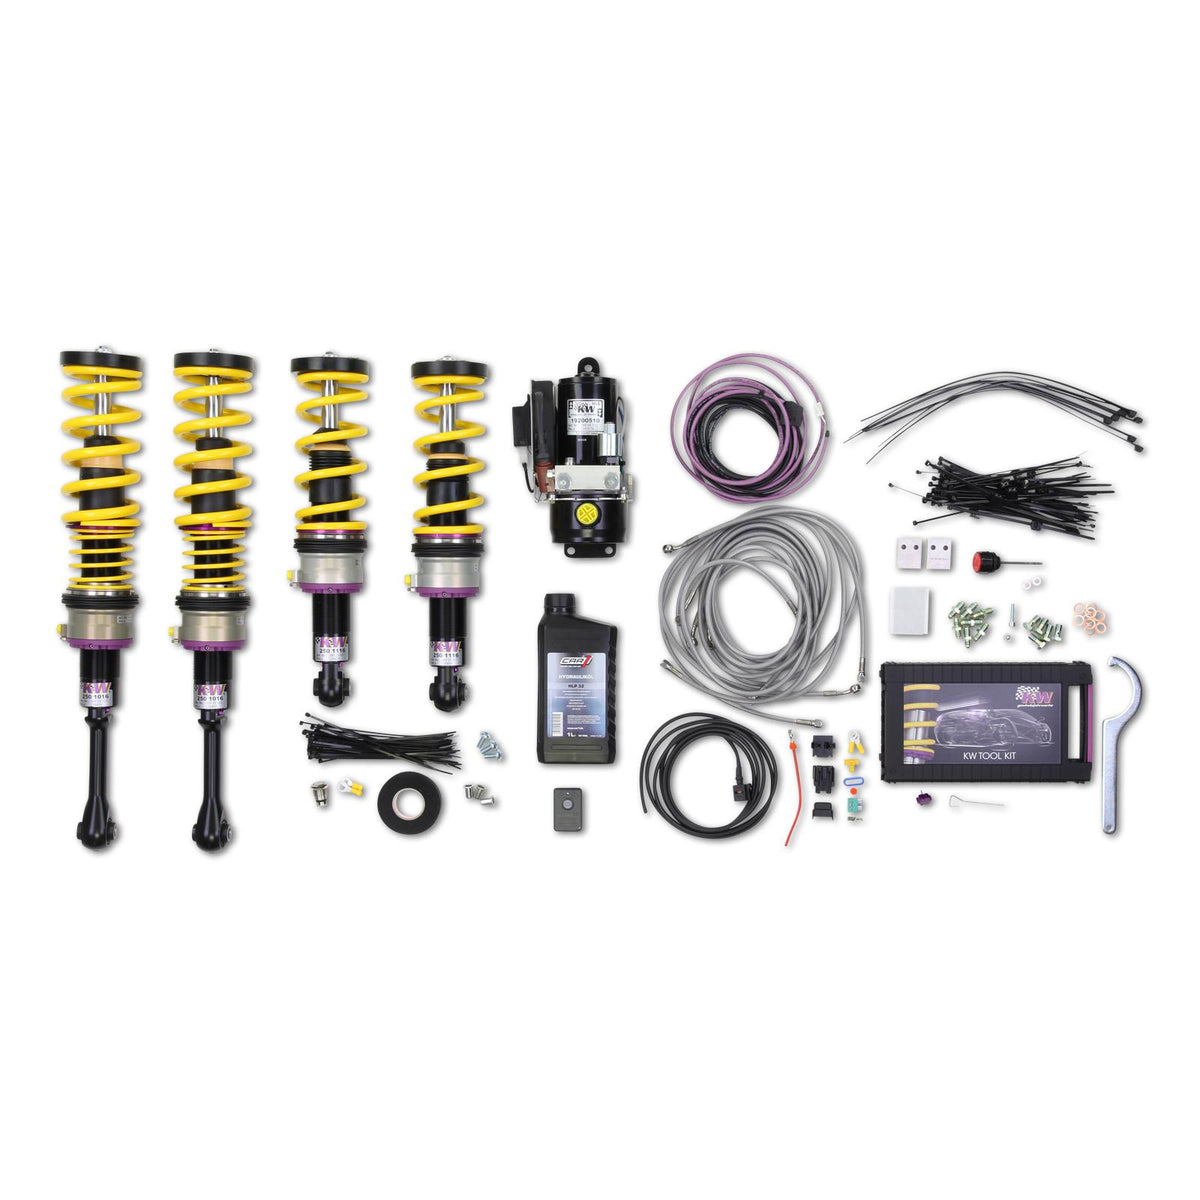 KW HLS 4 (Hydraulic Lift System) including KW inox v3 coilover kit